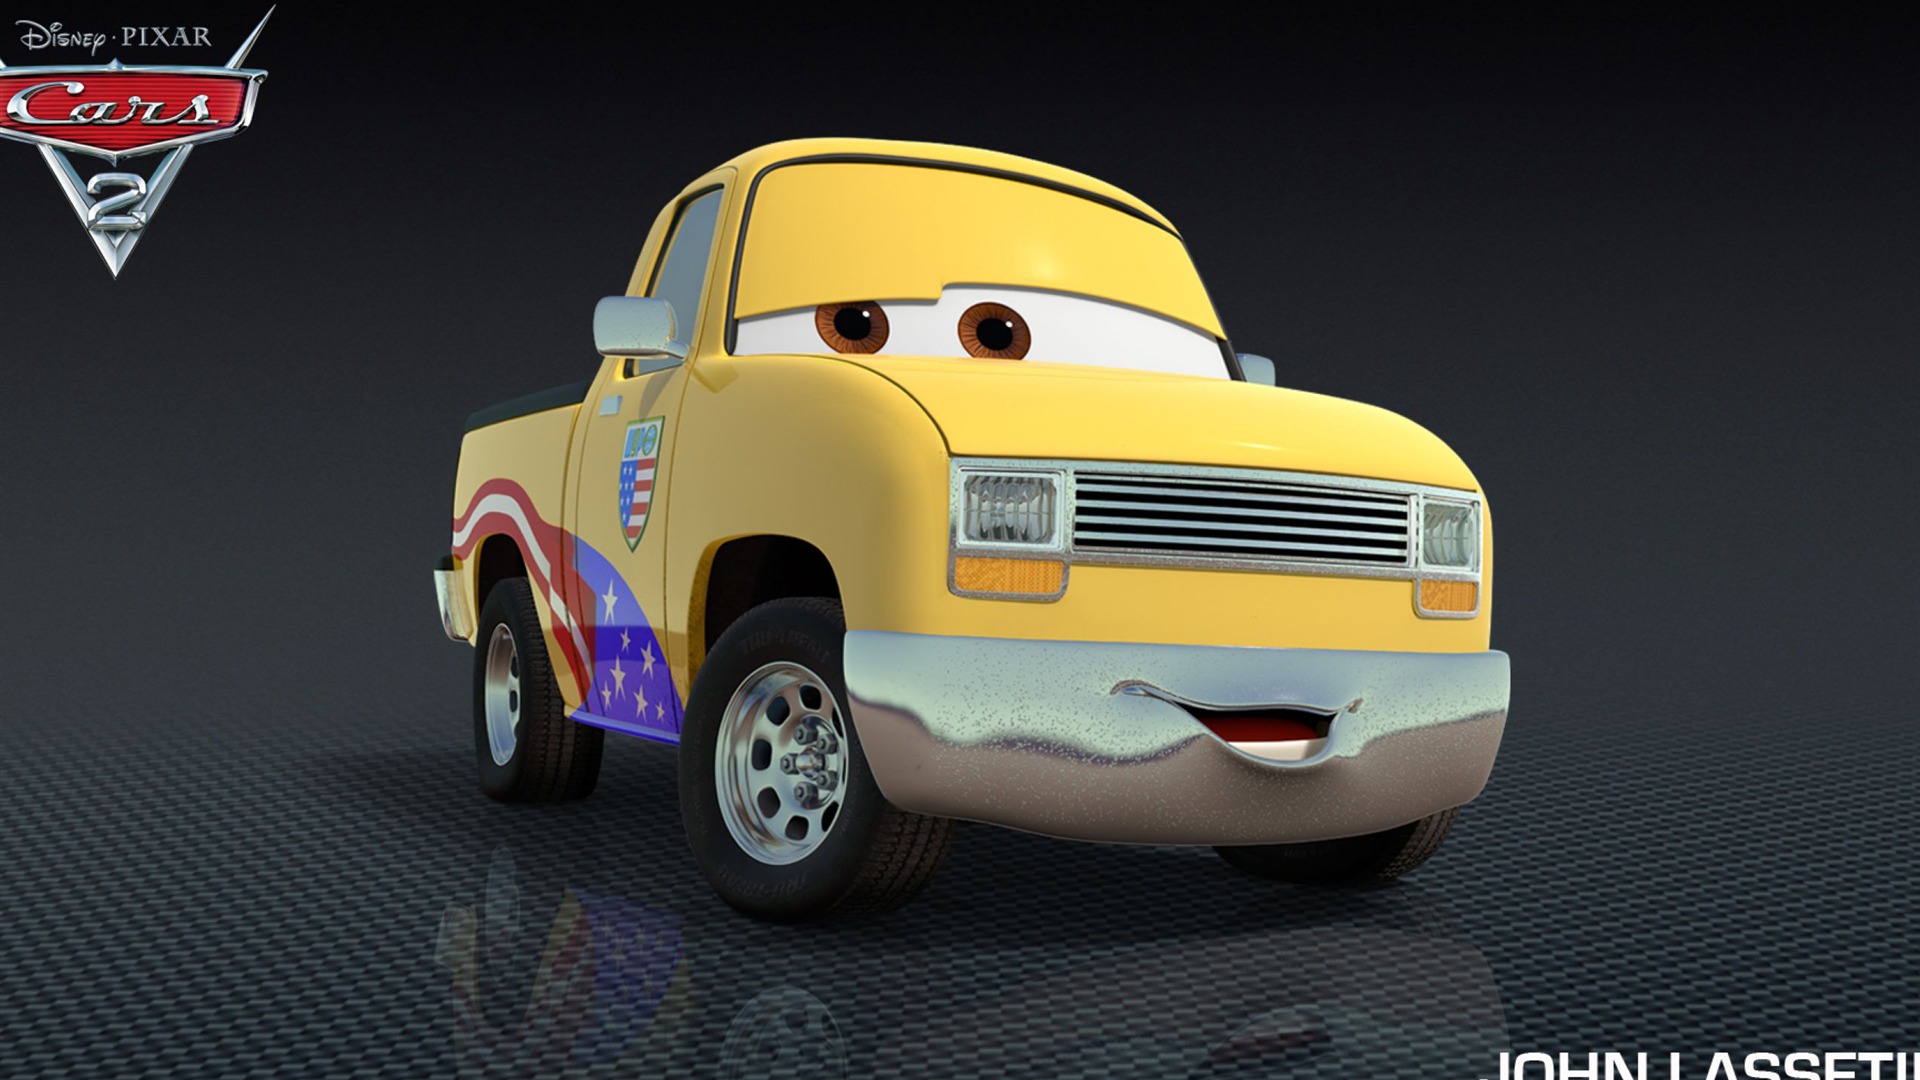 Cars 2 wallpapers #30 - 1920x1080